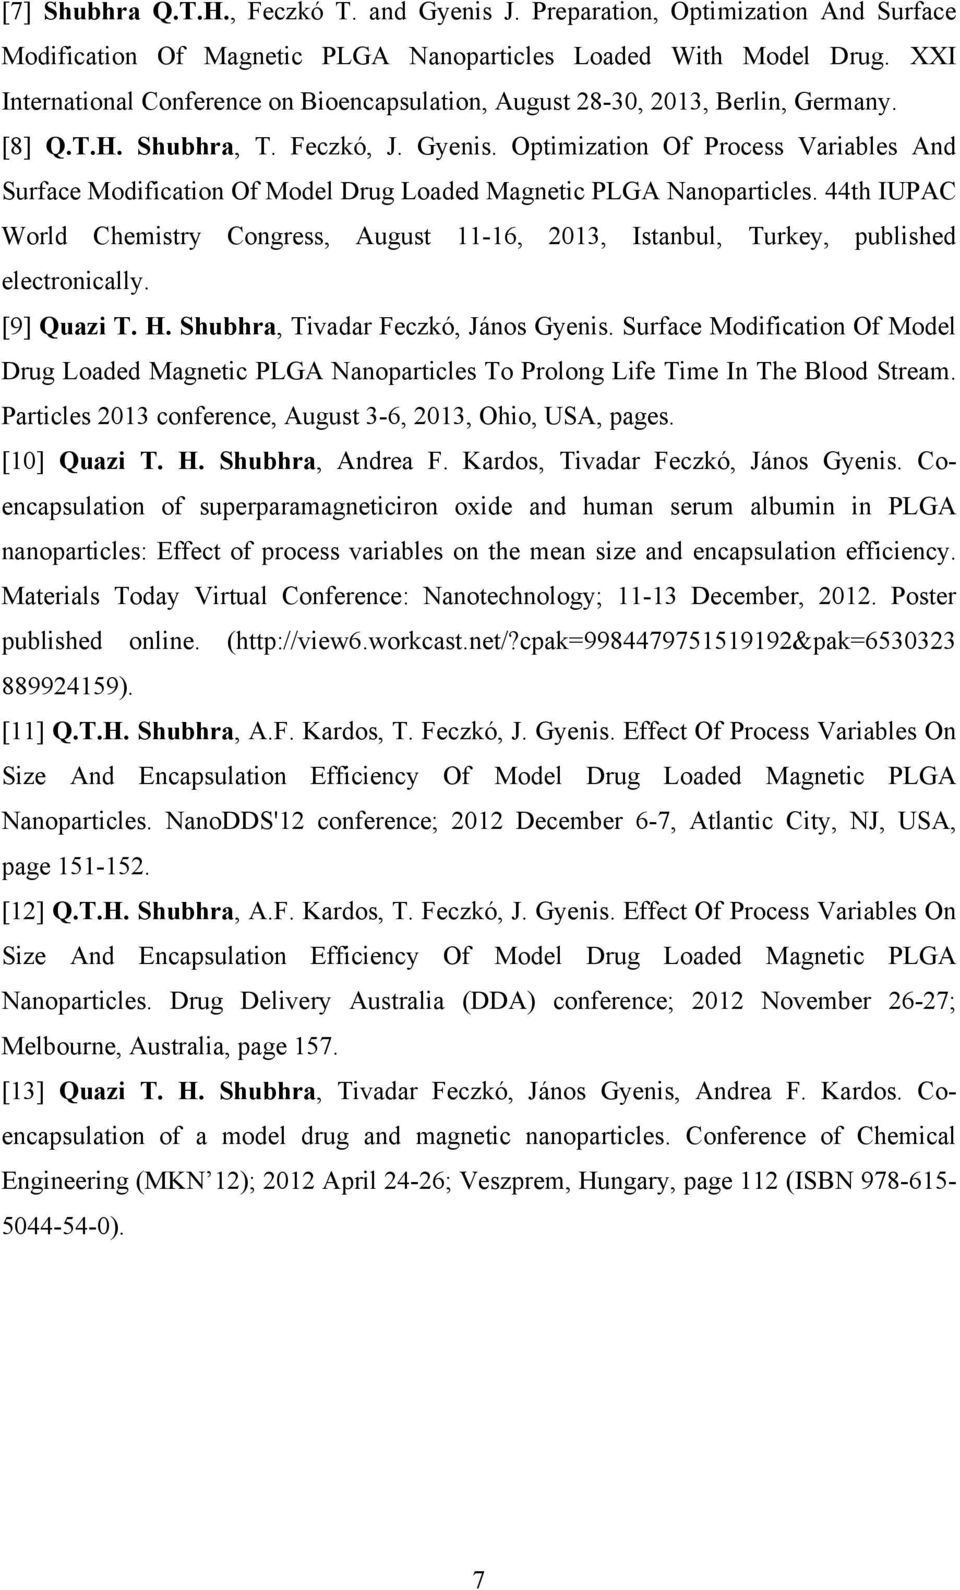 Optimization Of Process Variables And Surface Modification Of Model Drug Loaded Magnetic PLGA Nanoparticles.